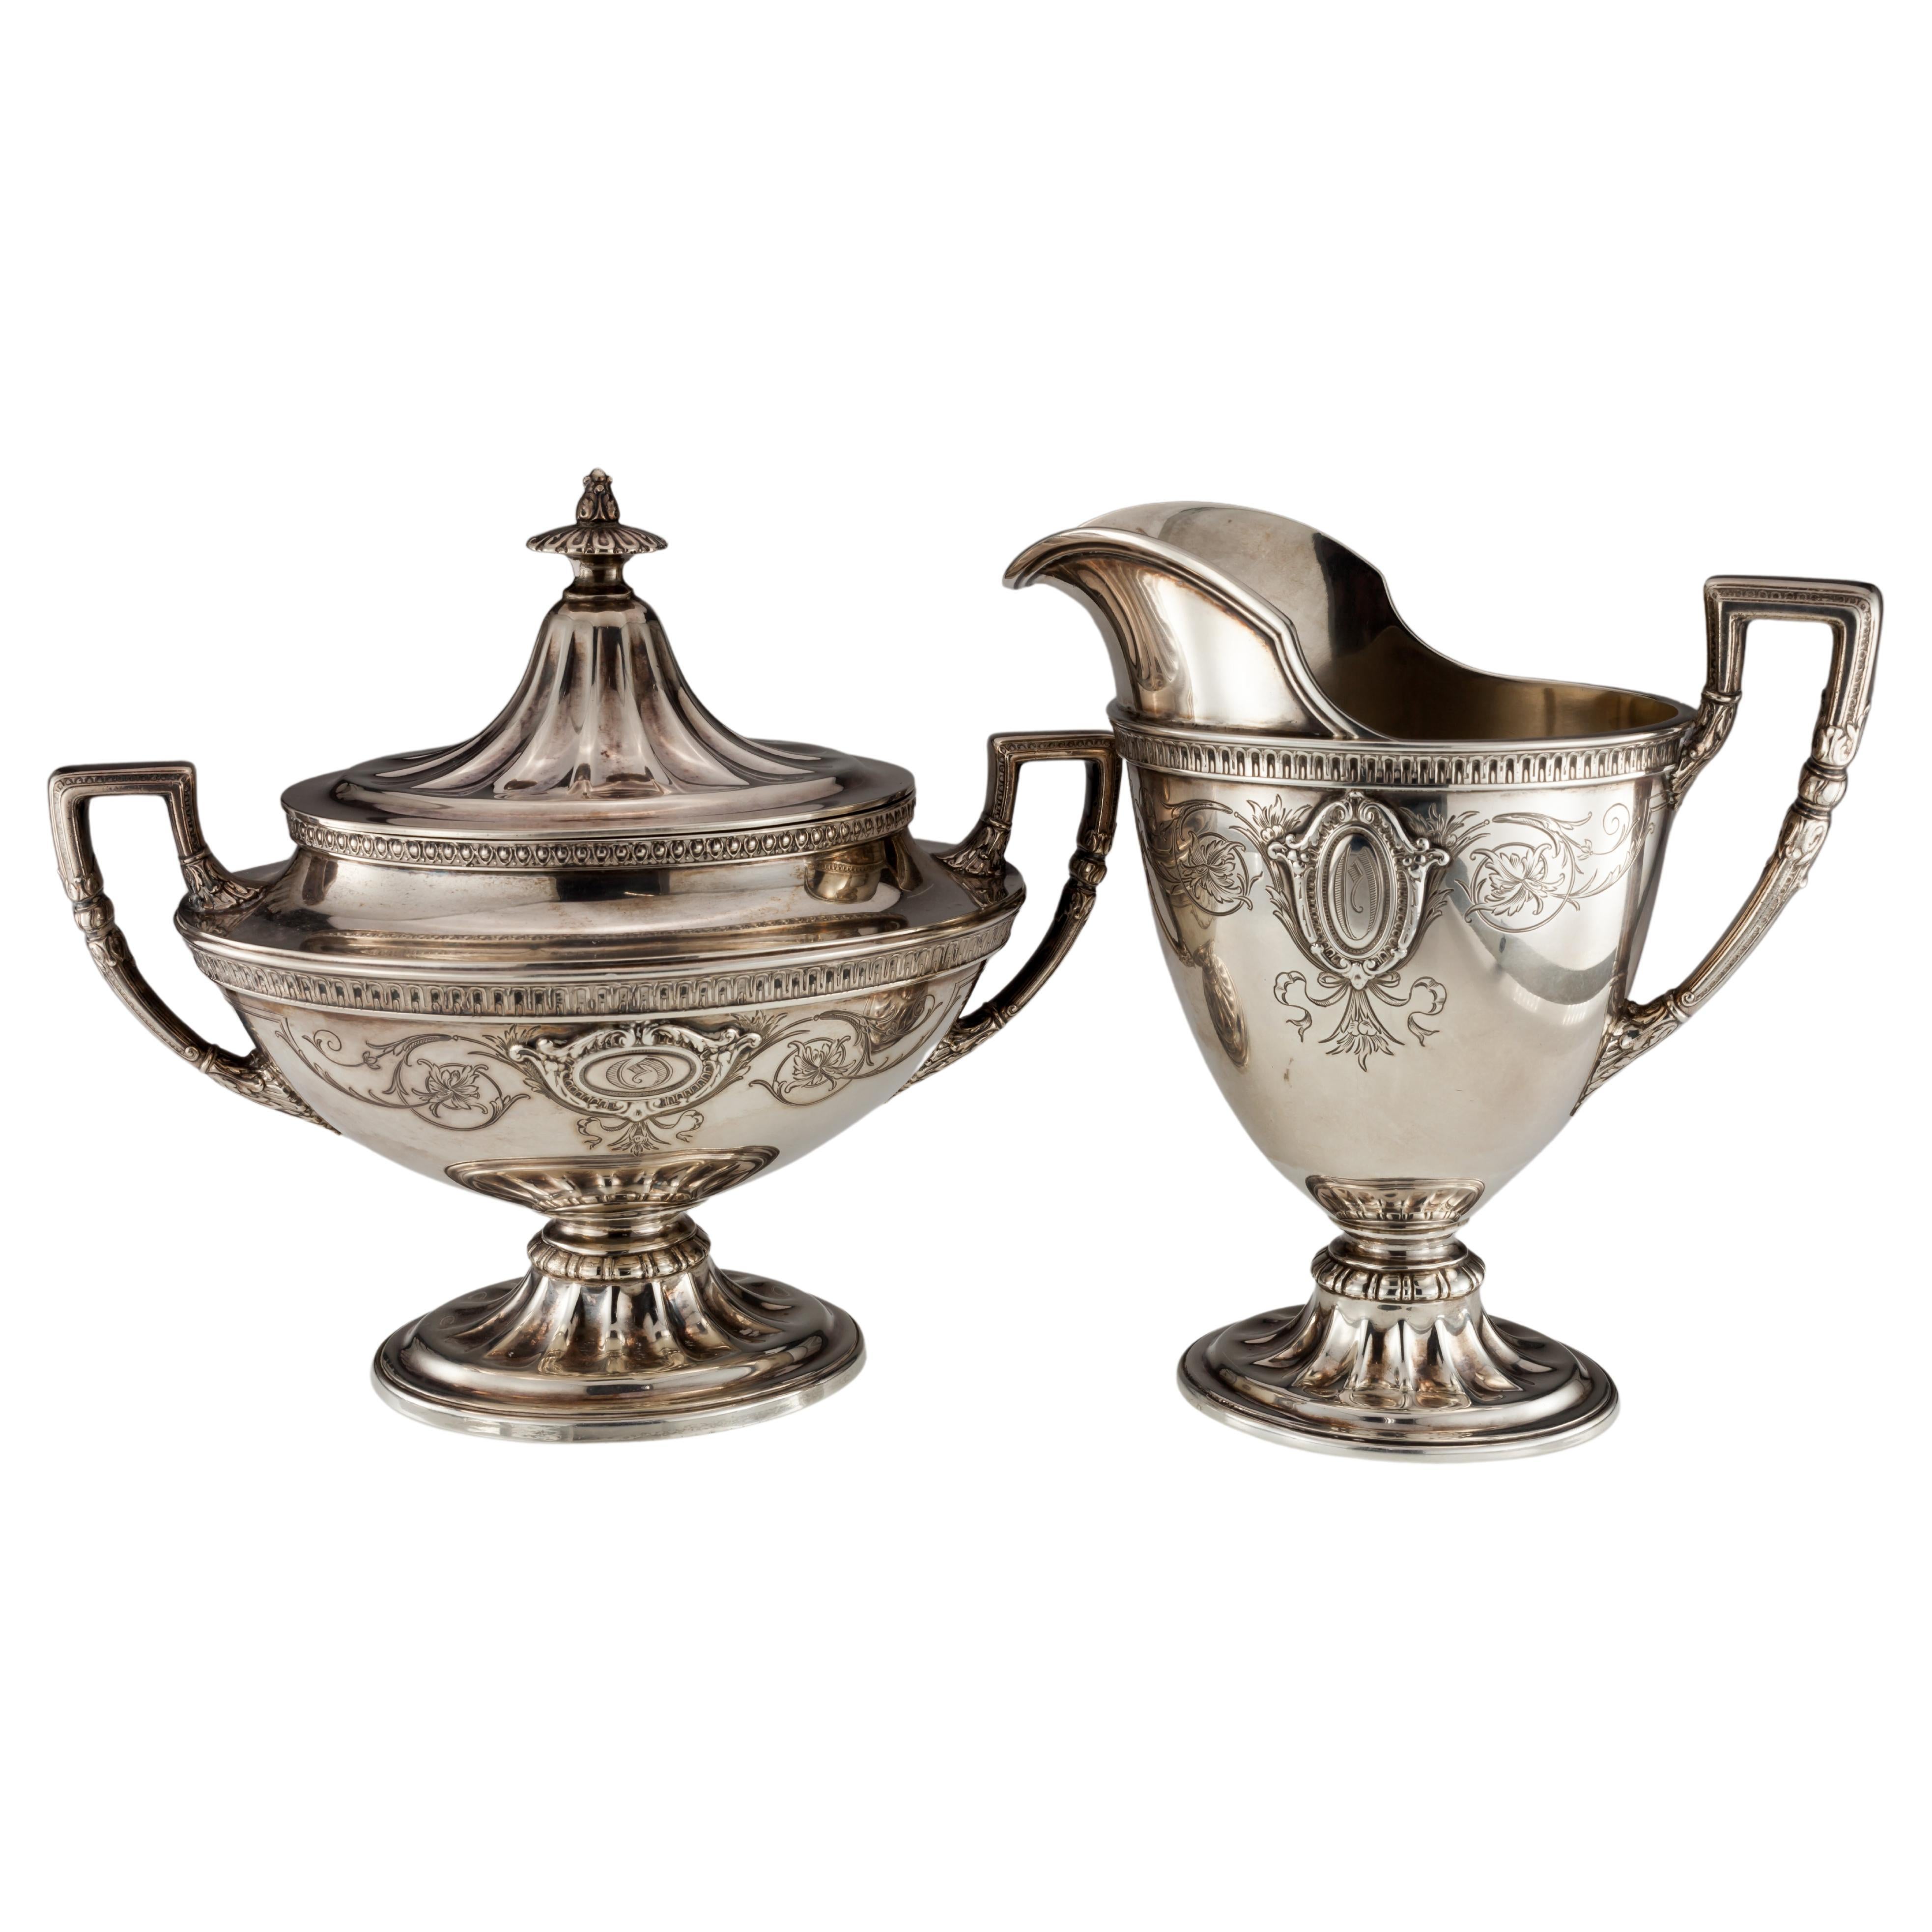 Juliet by Wallace Sterling Silver, Sugar & Creamer Set # 3700-2 For Sale